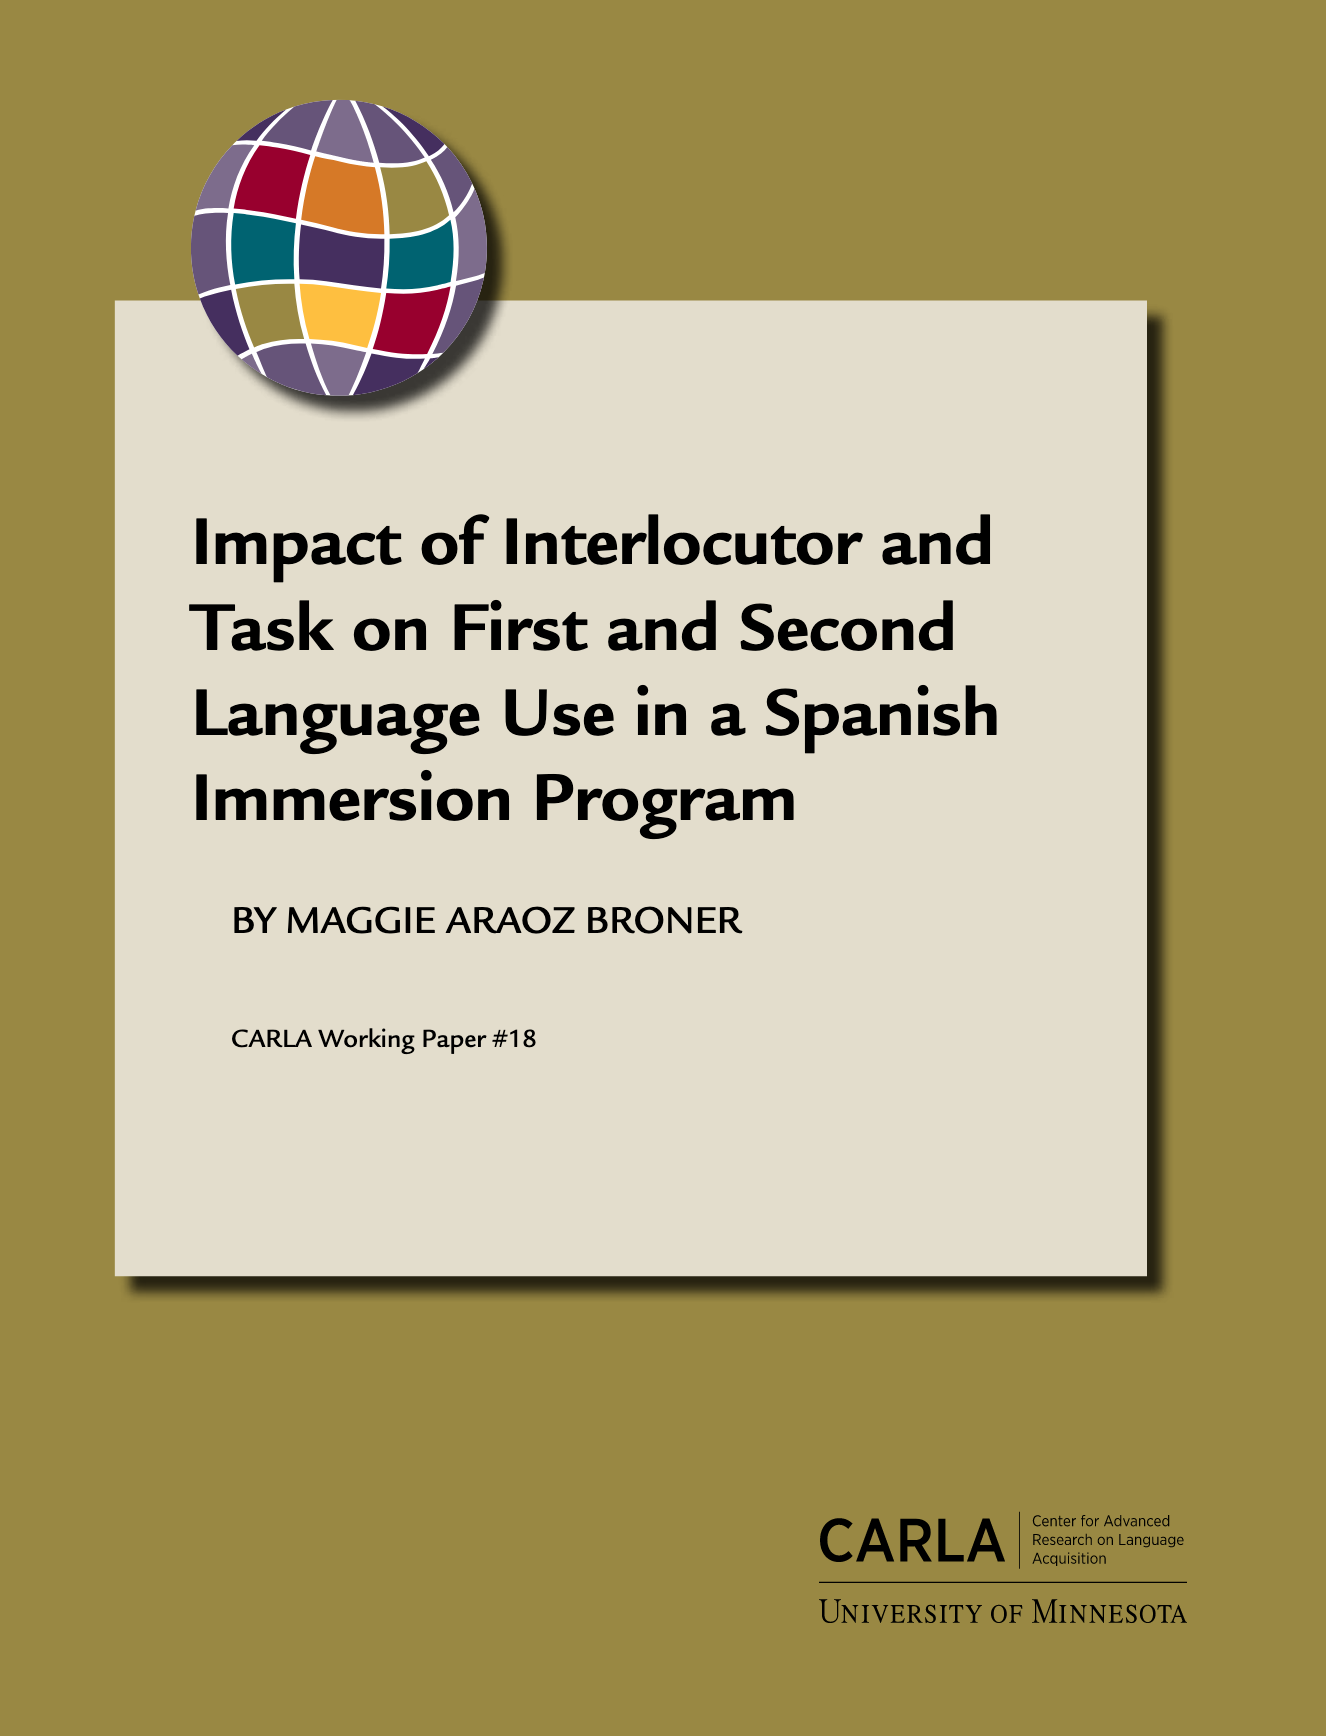 Impact of Interlocutor and Task on First and Second Language Use in a Spanish Immersion Program